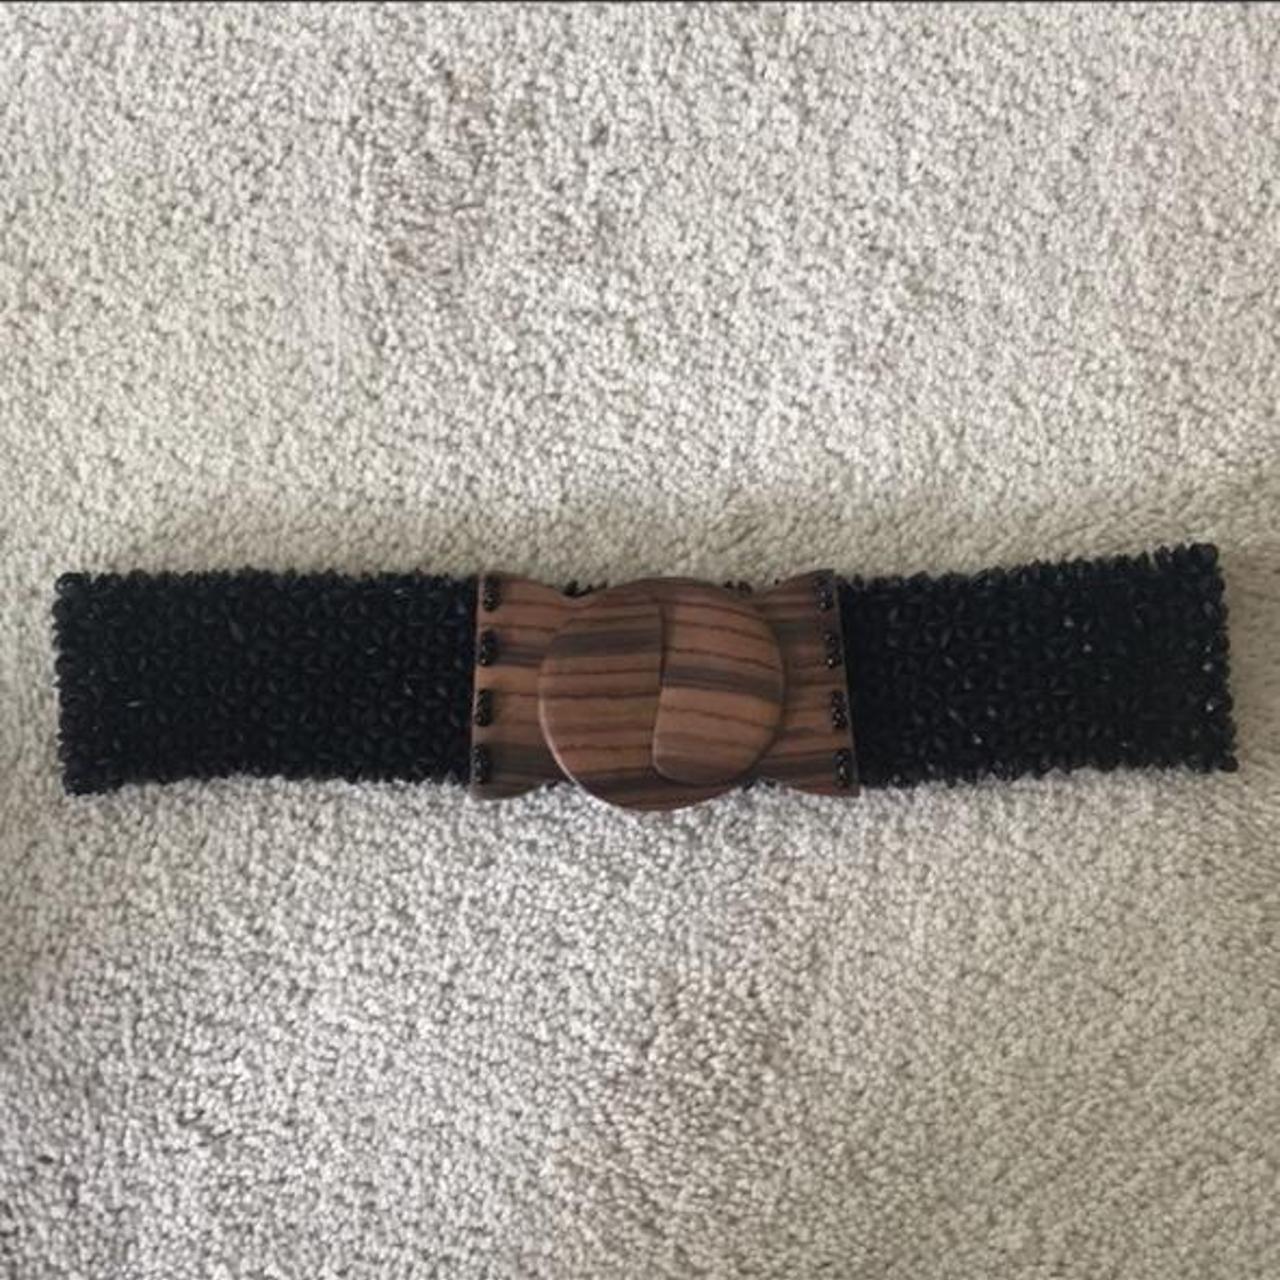 Product Image 1 - Anthropologie beaded belt
Size S/M. Never